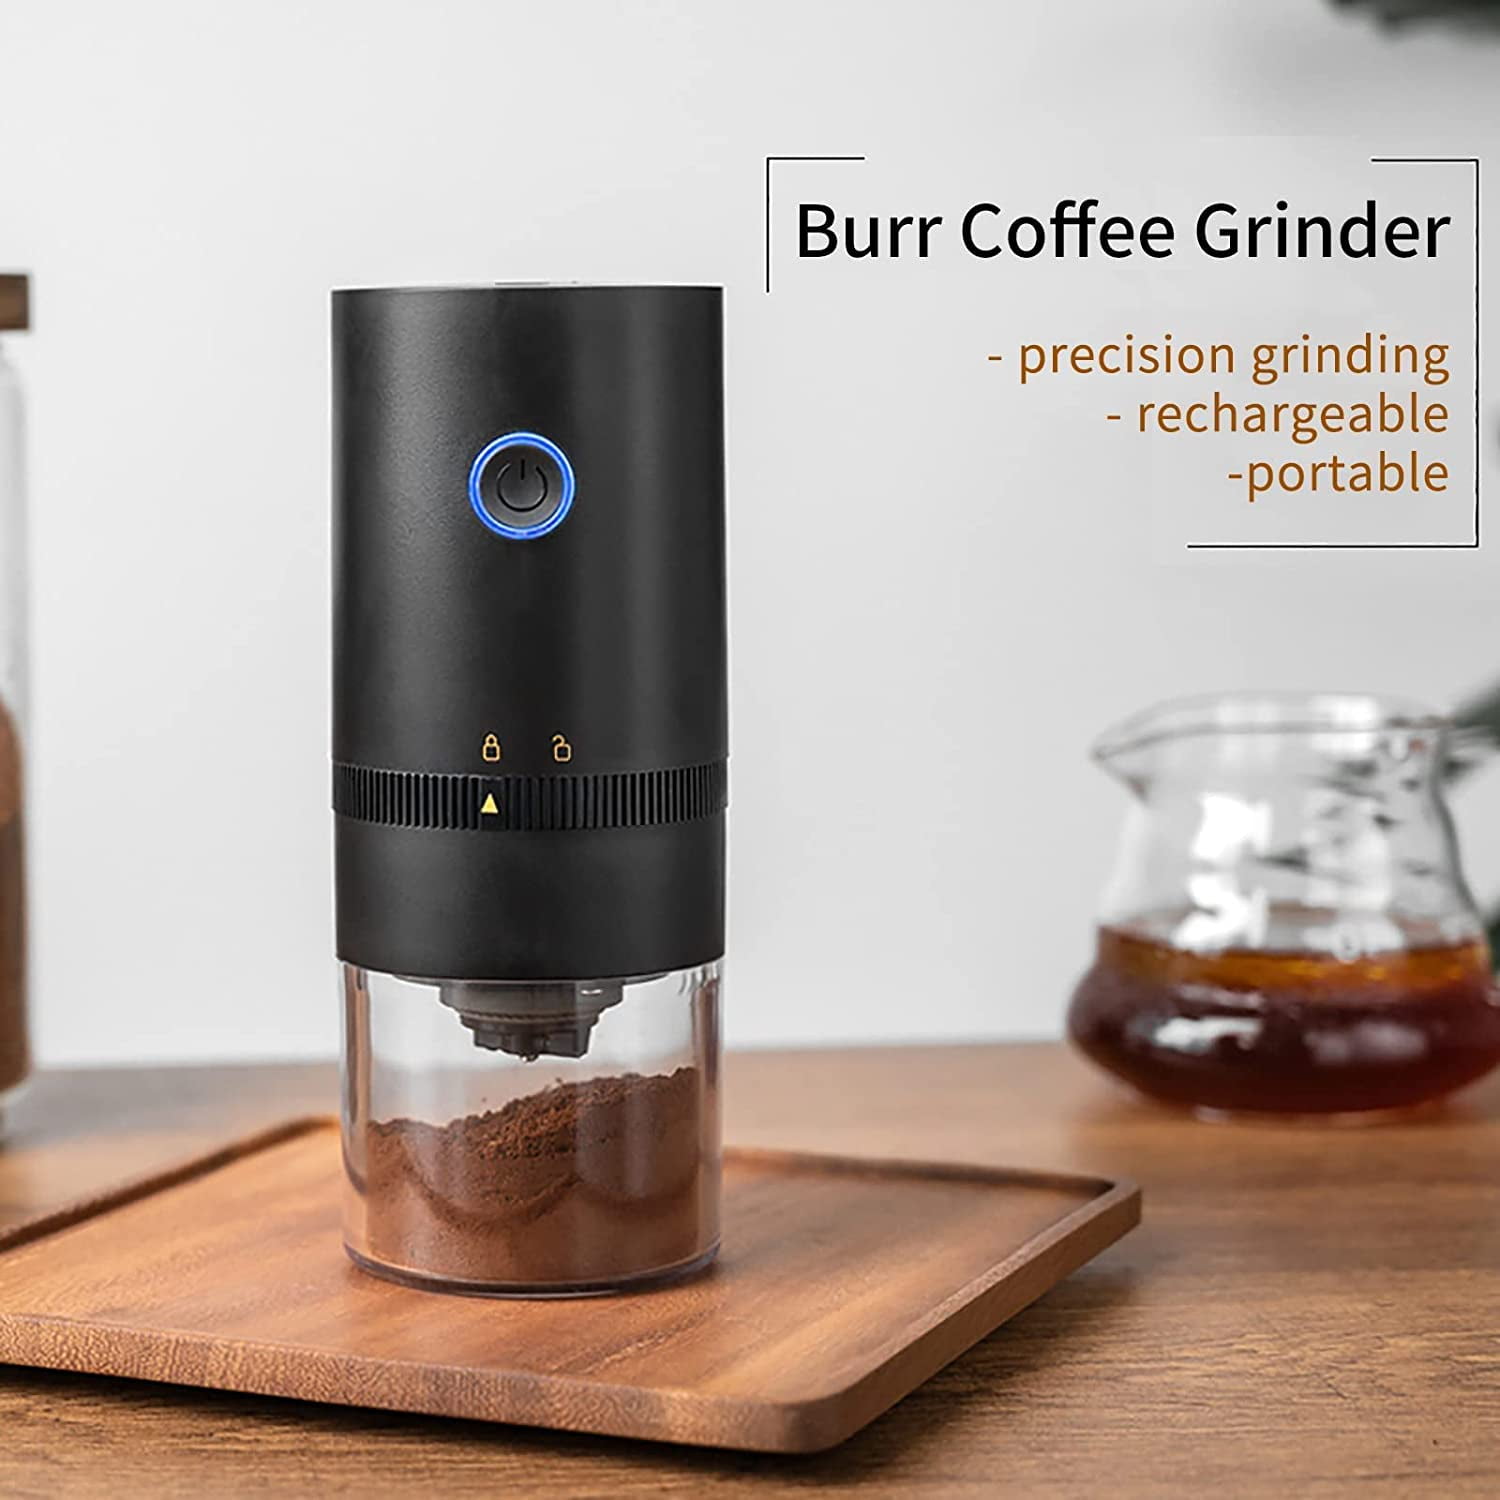 7 Things to Consider When Buying an Electric Coffee Grinder